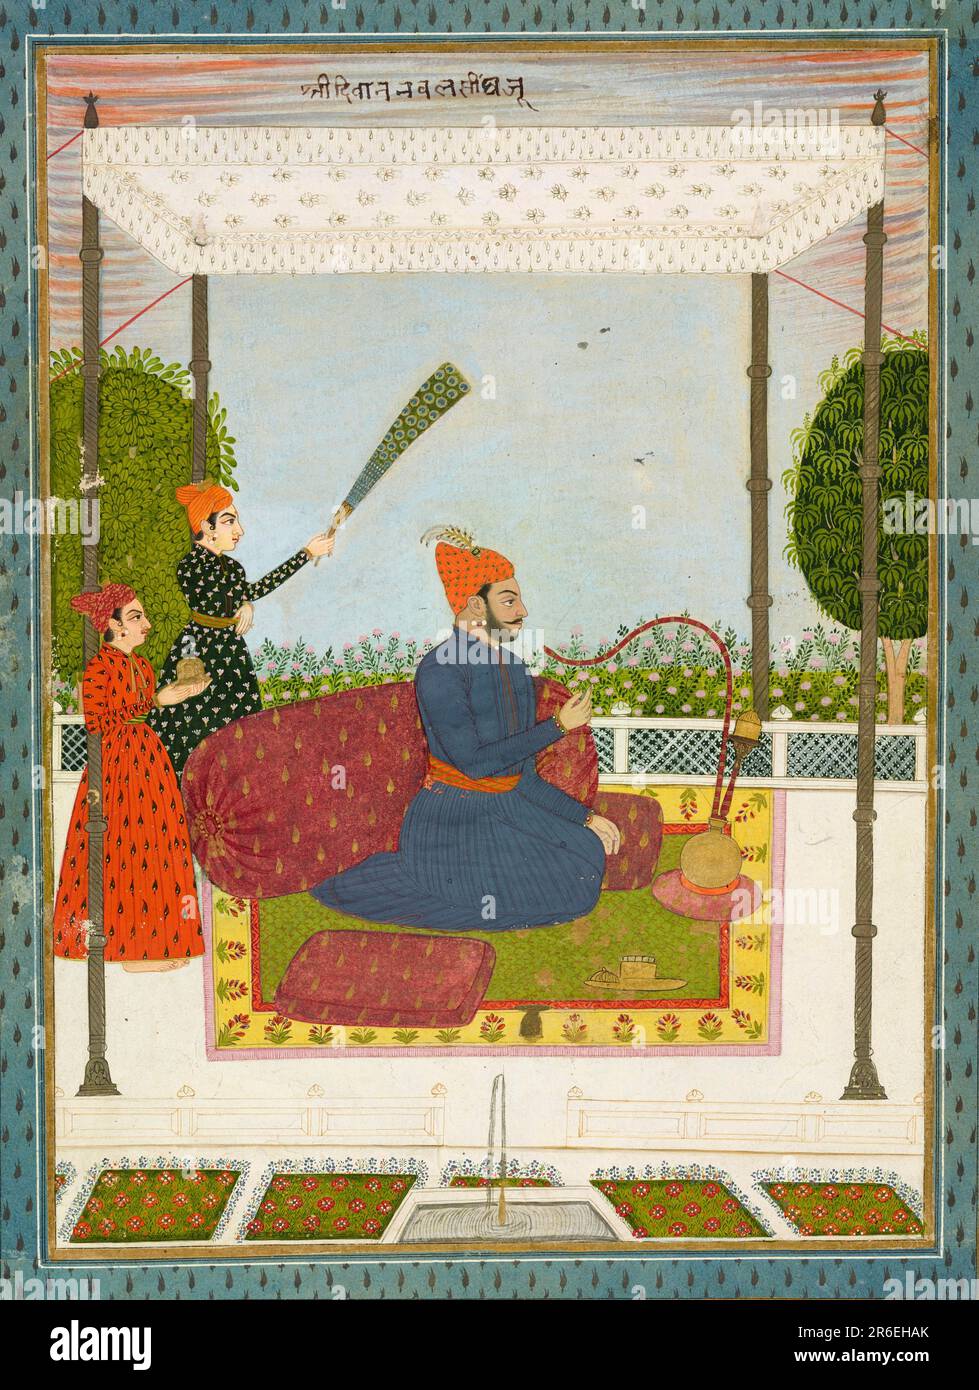 Dressed in an ink blue jama and a rich orange turban with a matching wave-patterned (leheriya) sash (patka), Nawal Singh sits beneath a cool white canopy. An enormous amber-colored bolster with gold leaf-shaped motifs supports him. Suitable to his status, attendants wait on him and one waves a peacock feathered fly-whisk (morchal), a symbol of royalty. Date: ca. 1750. Opaque watercolor and gold on paper. Origin: Datia, Madhya Pradesh state, India. Museum: Freer Gallery of Art and Arthur M. Sackler Gallery. Stock Photo